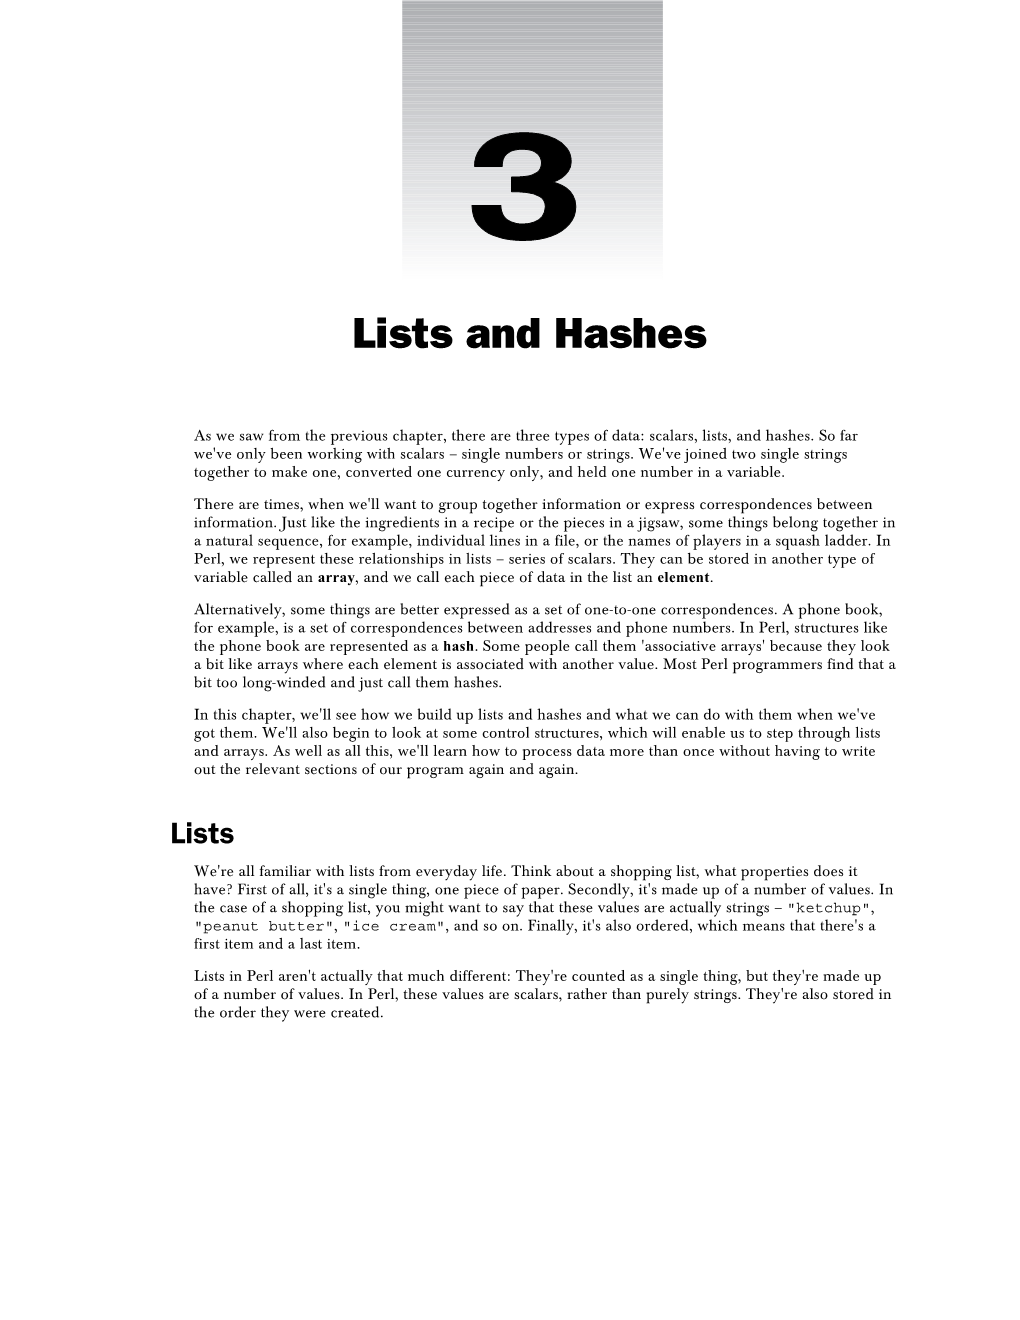 Lists and Hashes